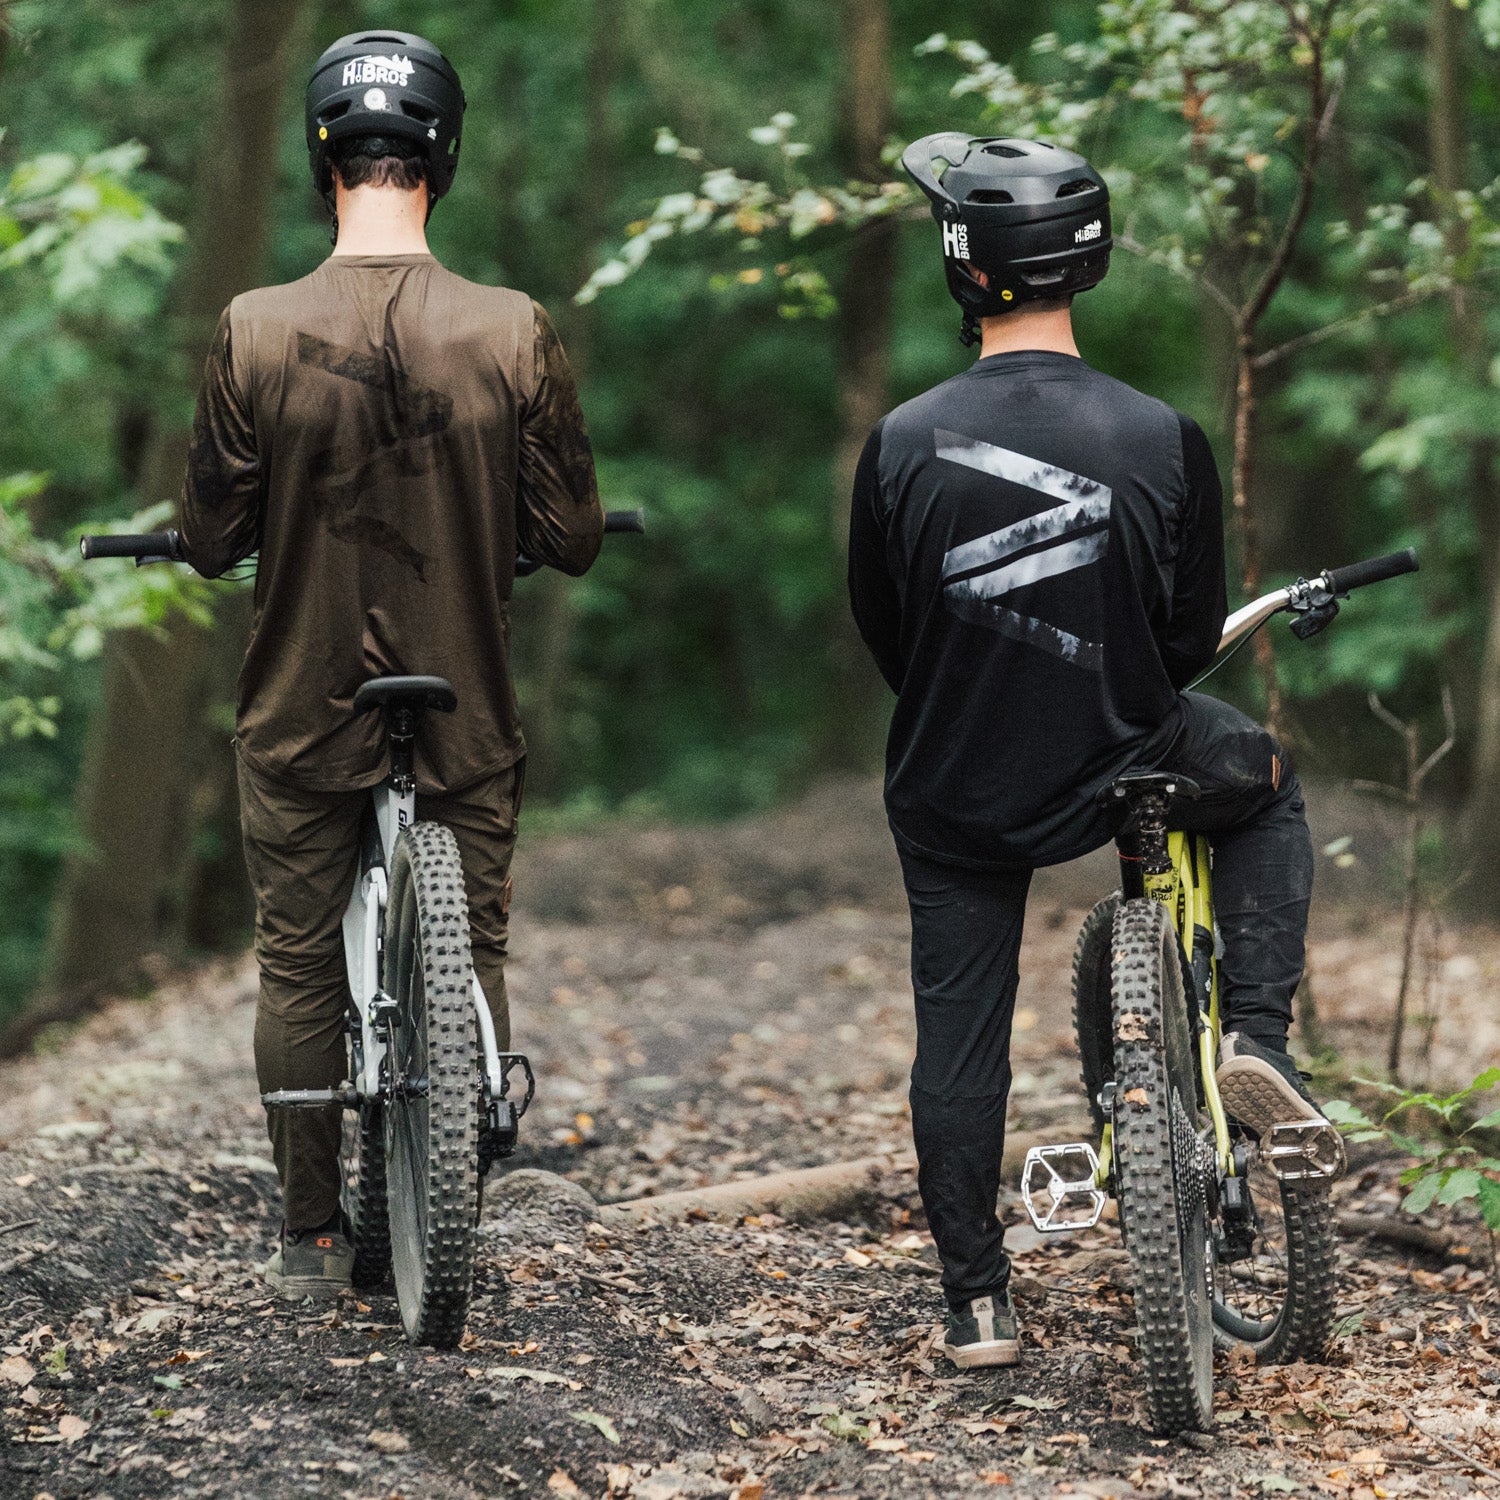 Elegant yet sturdy black Gravity 1.02 mountain bike pants, designed to withstand varied biking conditions while ensuring rider comfort